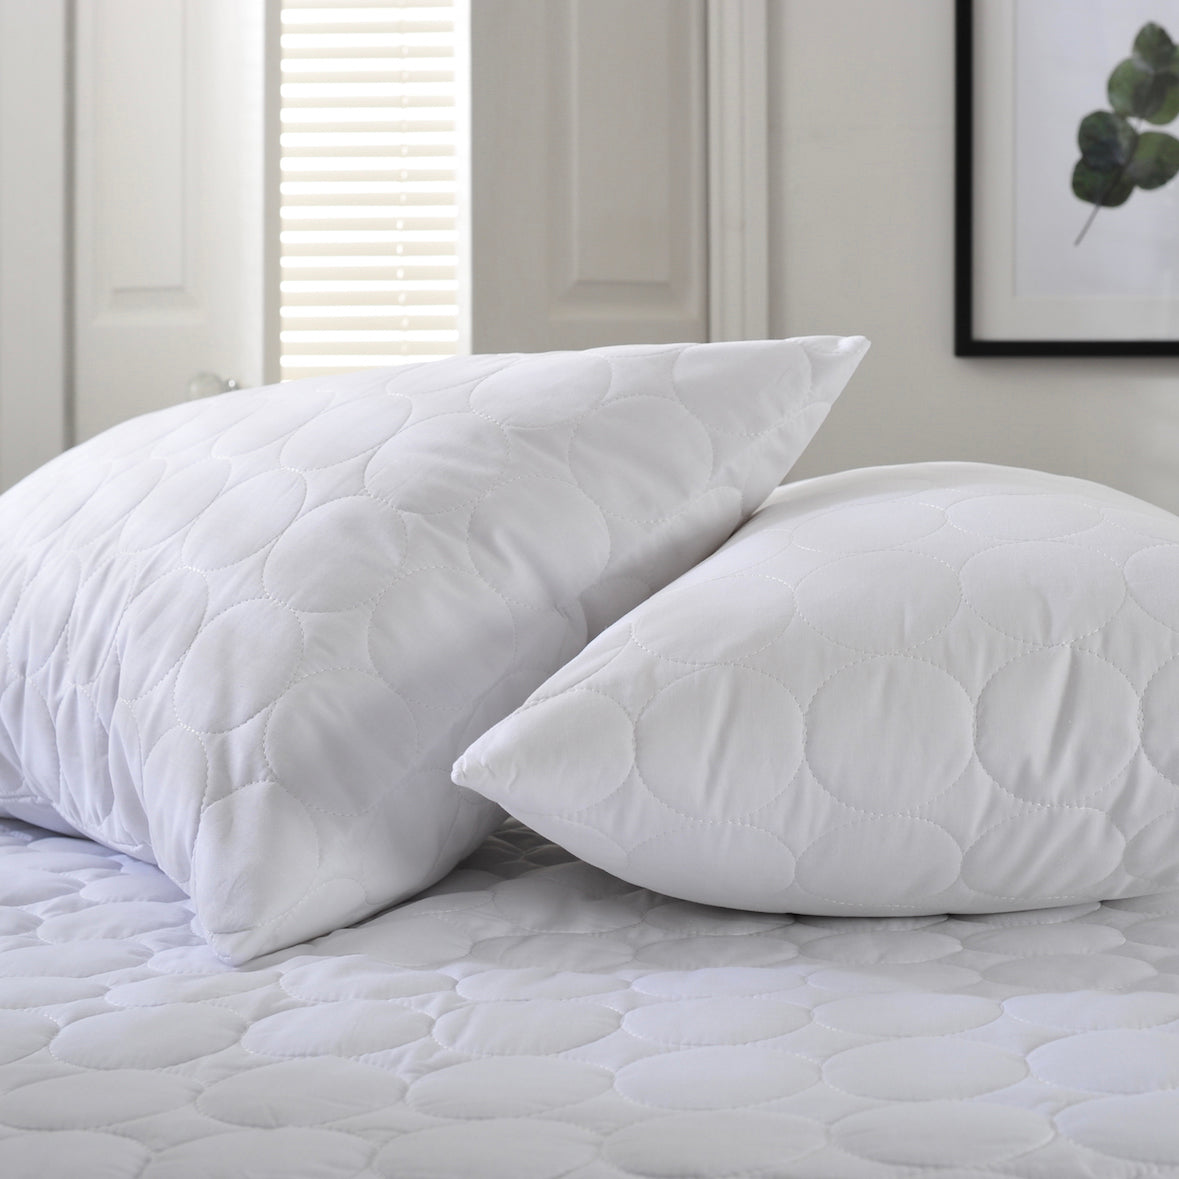 The Lyndon Company Luxury Cotton Quilted Pillow Protector Pair